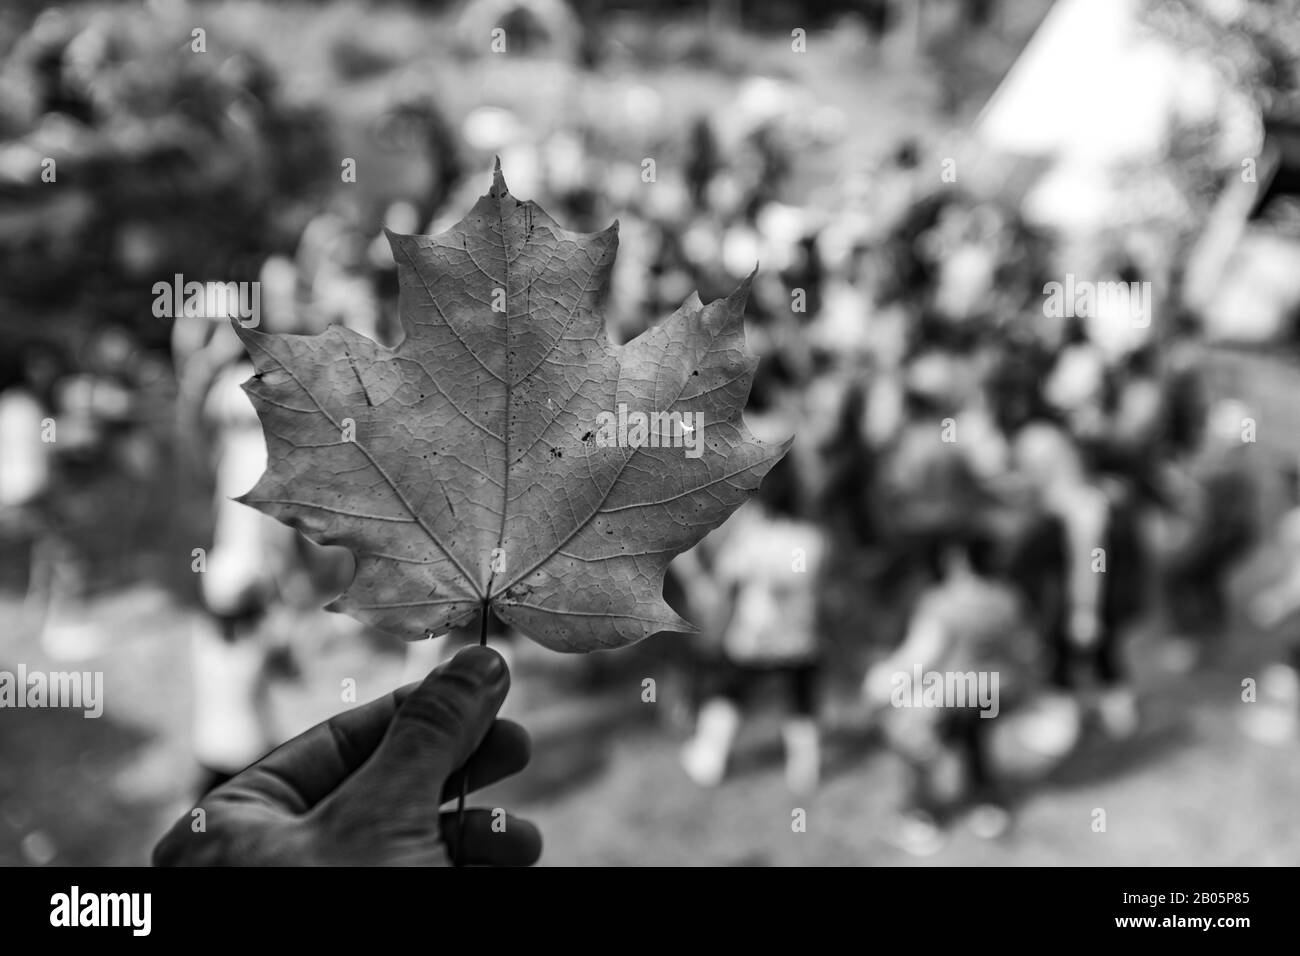 A selective focus monochrome shot on a person holding a fallen leaf, against a blurry background of a group of people meditating during earth festival Stock Photo